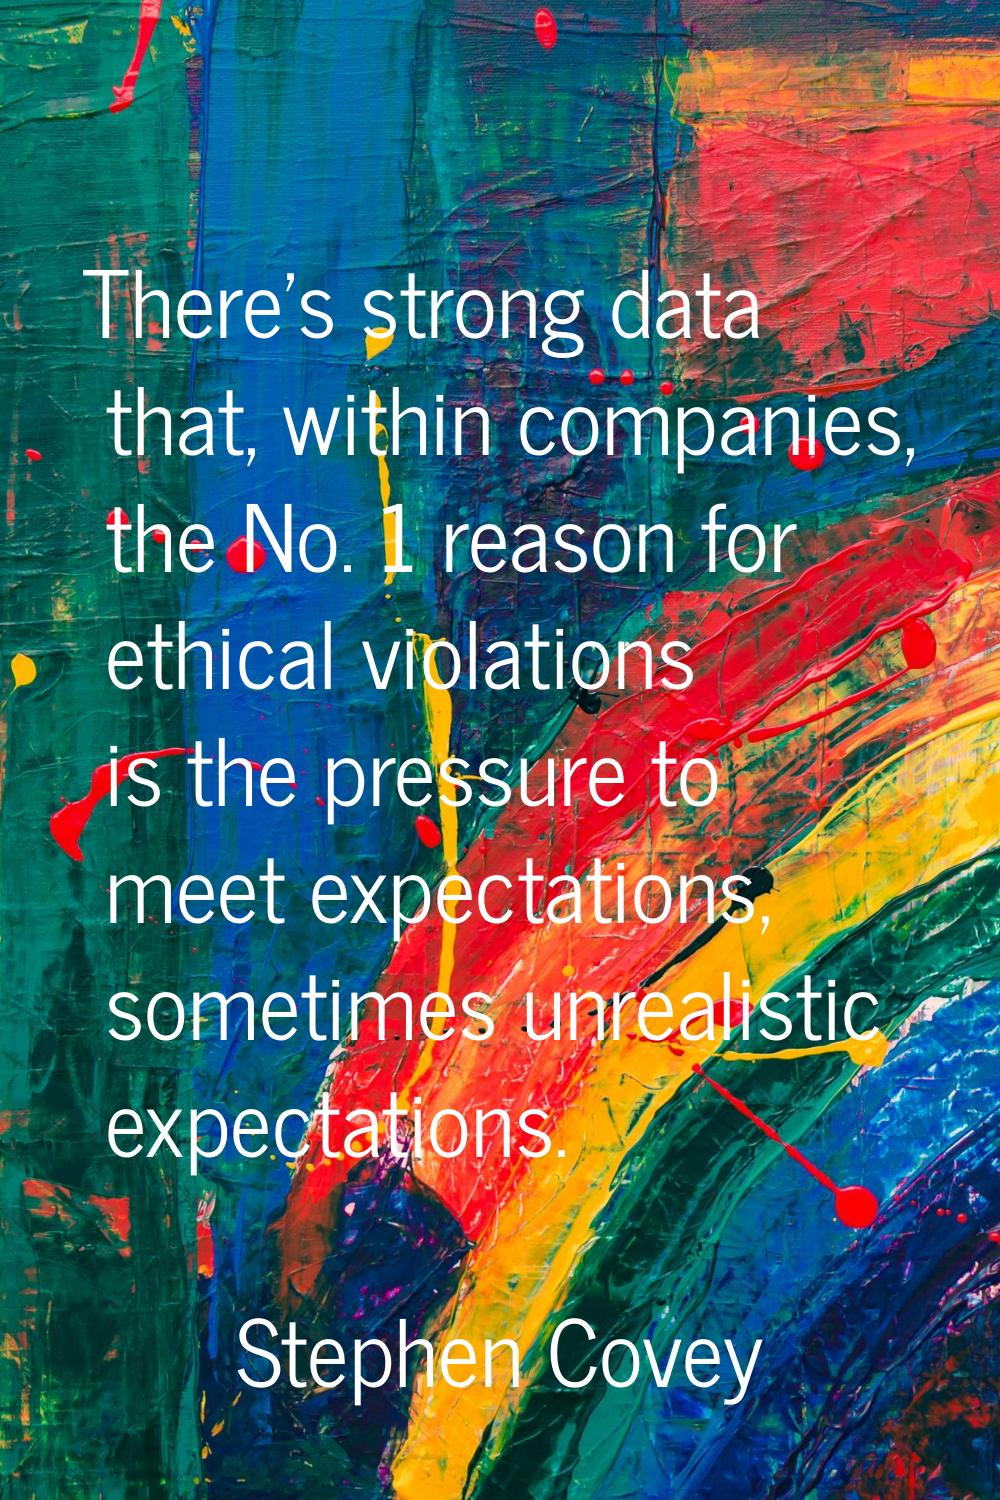 There's strong data that, within companies, the No. 1 reason for ethical violations is the pressure